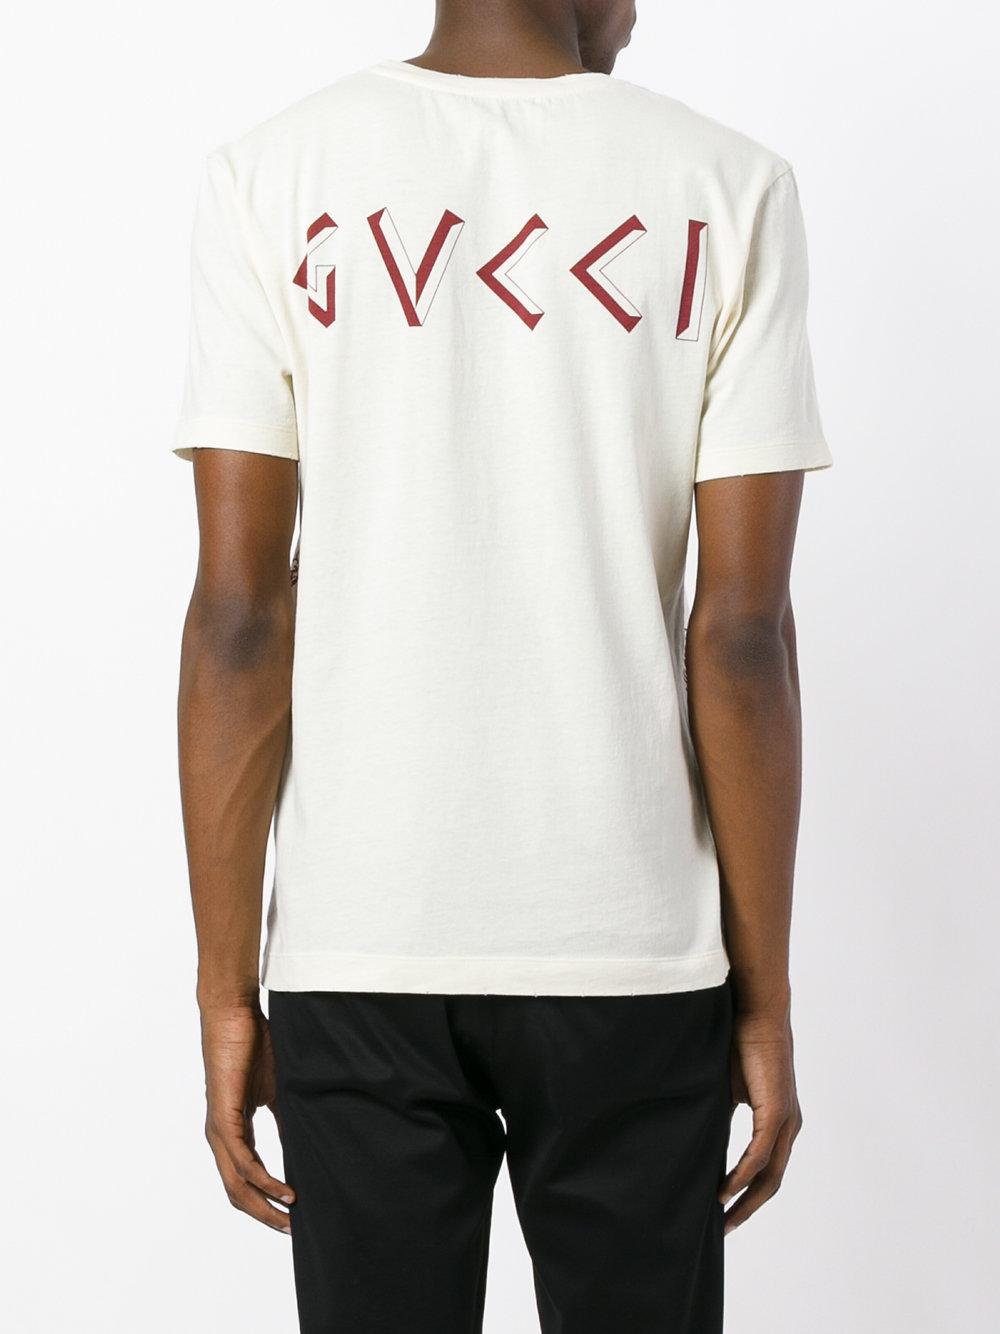 gucci loved t shirt